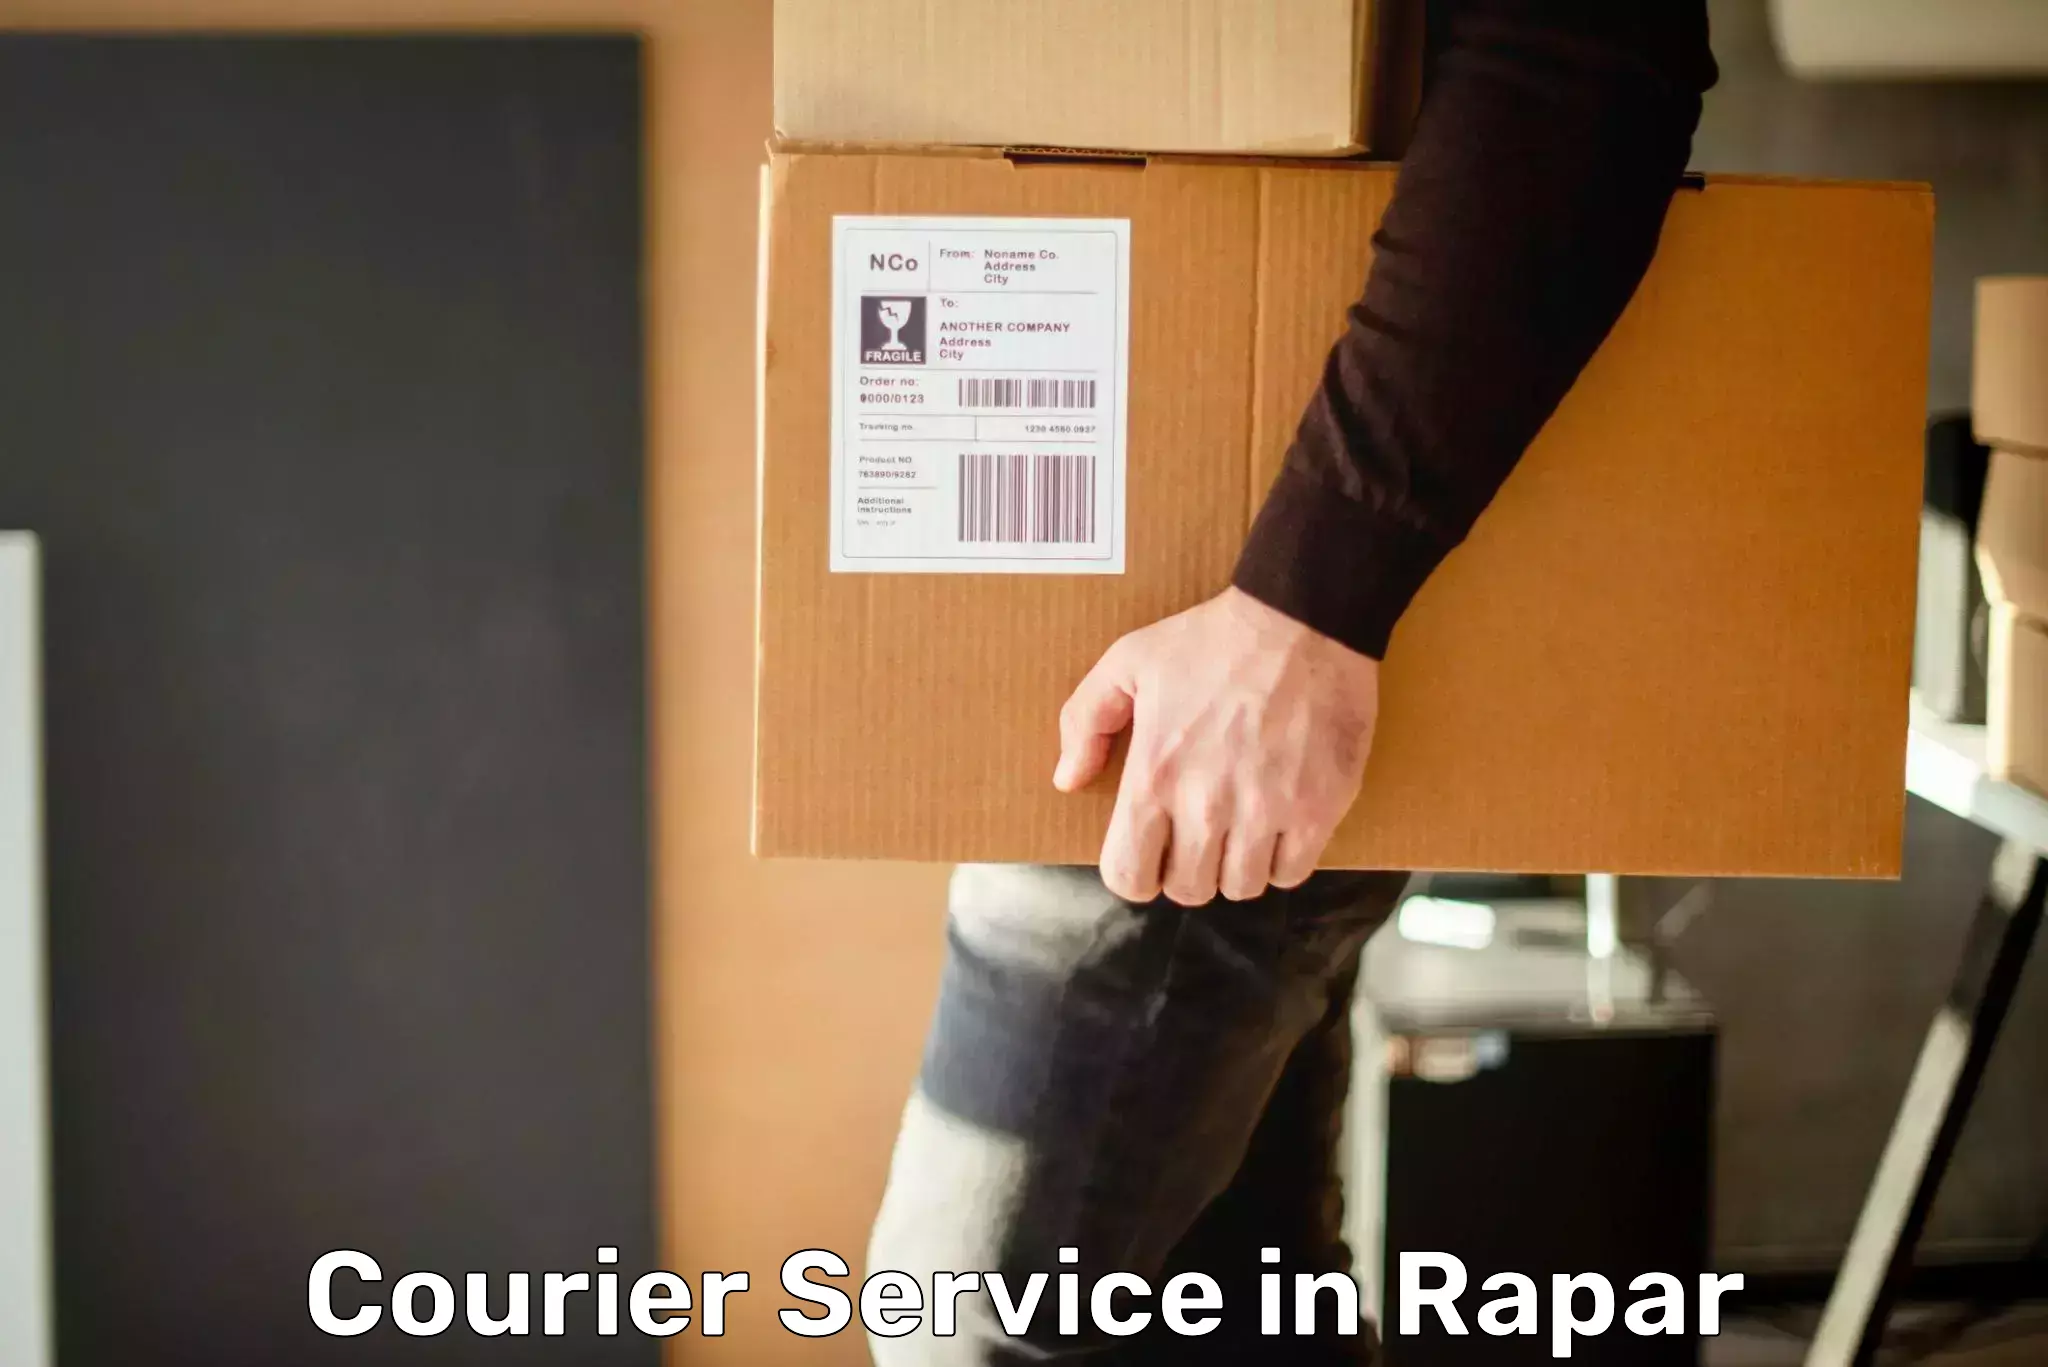 Efficient package consolidation in Rapar